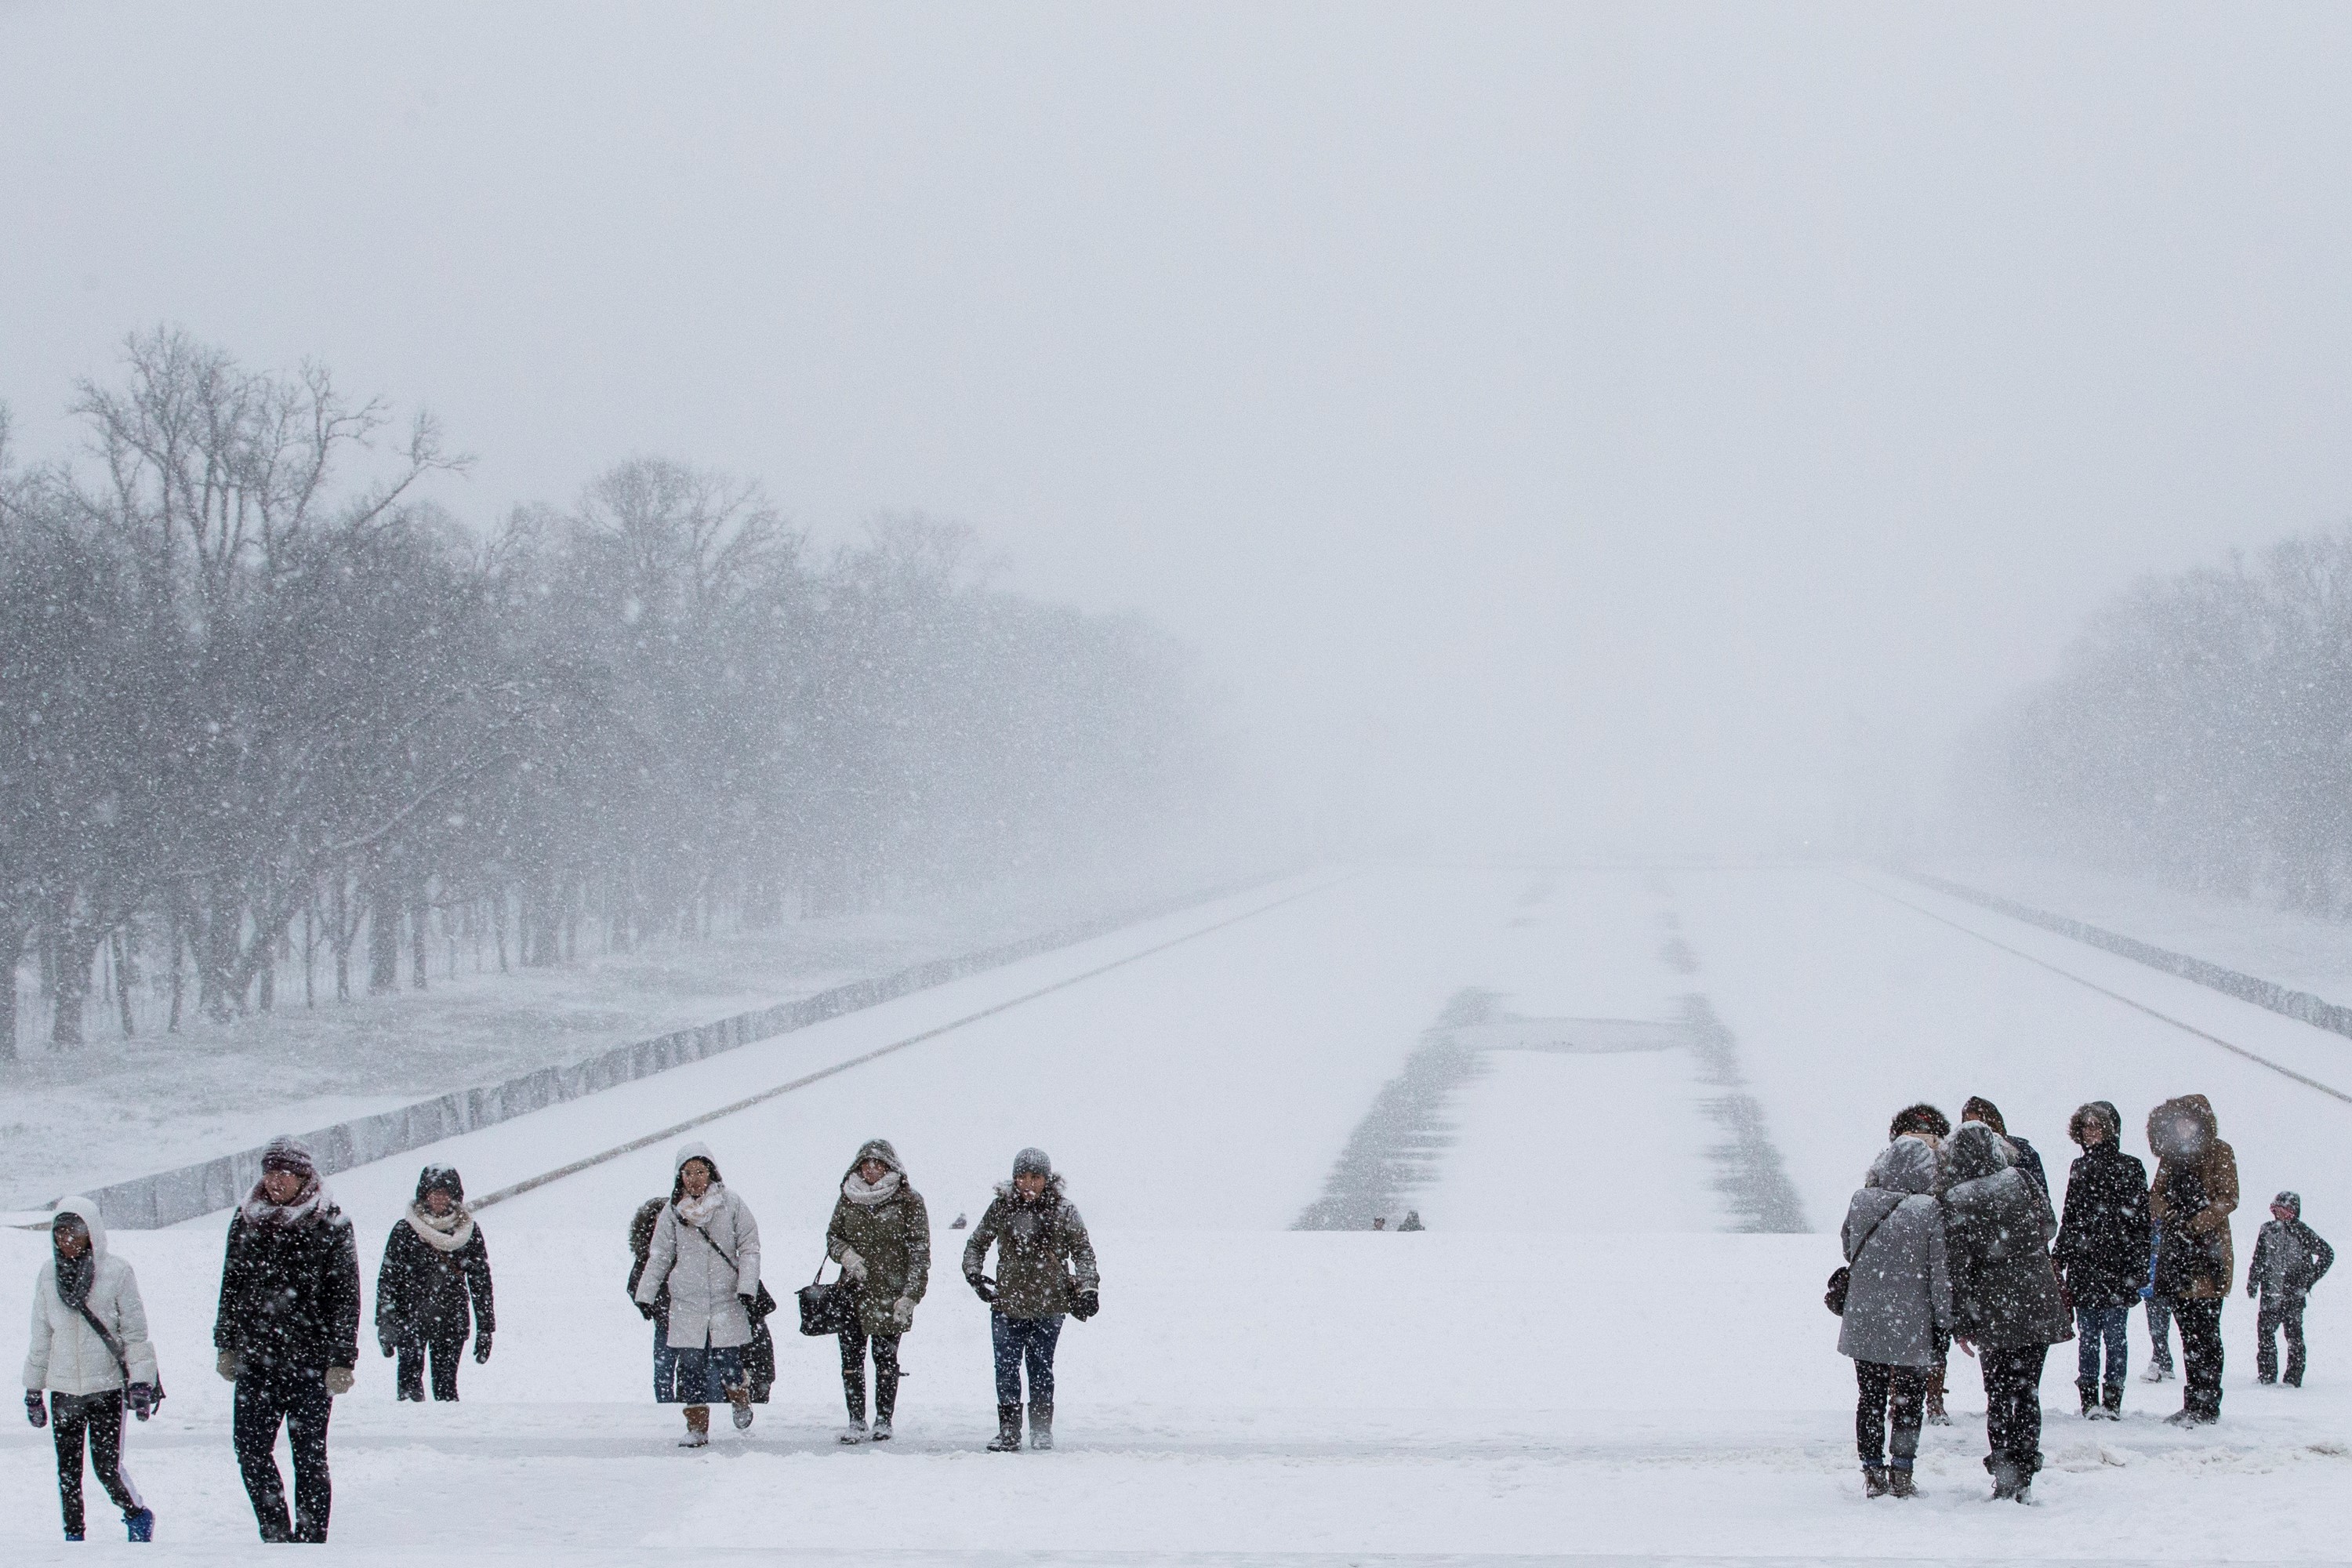 People walk along the steps between the Reflecting Pool and Lincoln Memorial in Washington, DC on Jan. 22, 2015.